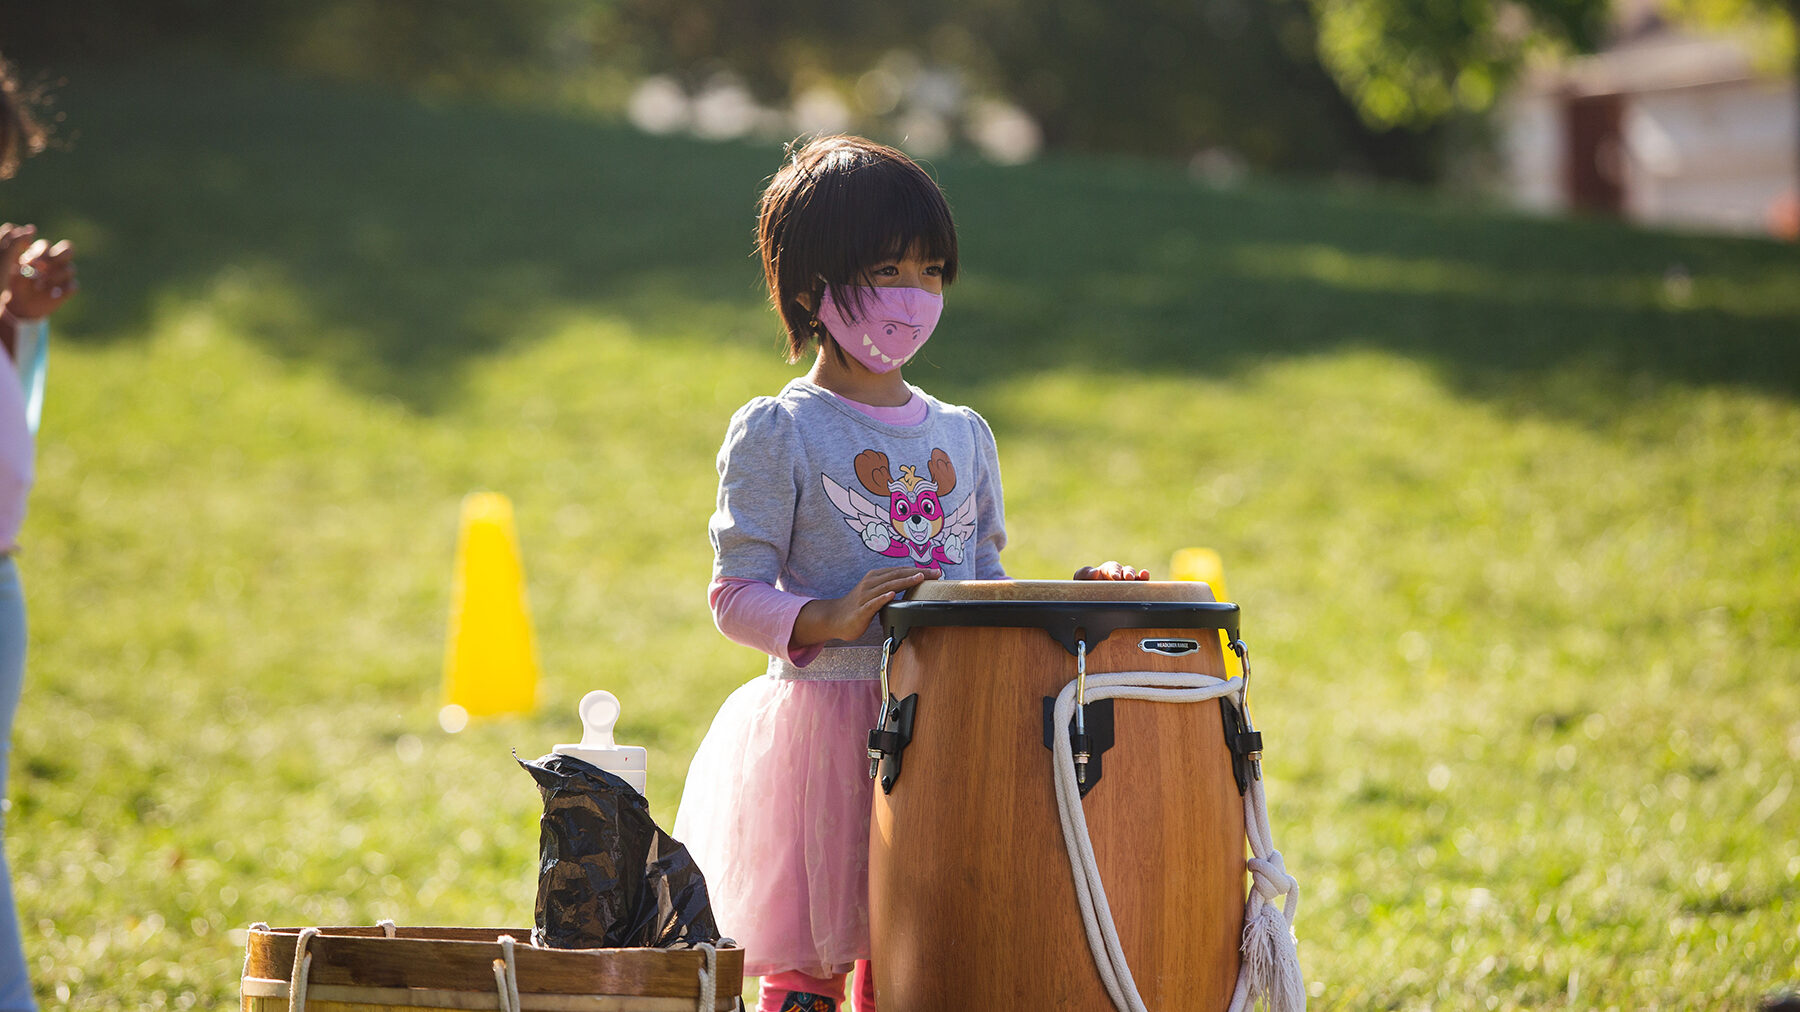 A child with a pink tutu stands in front of a large drum that is placed on the ground in front of them.